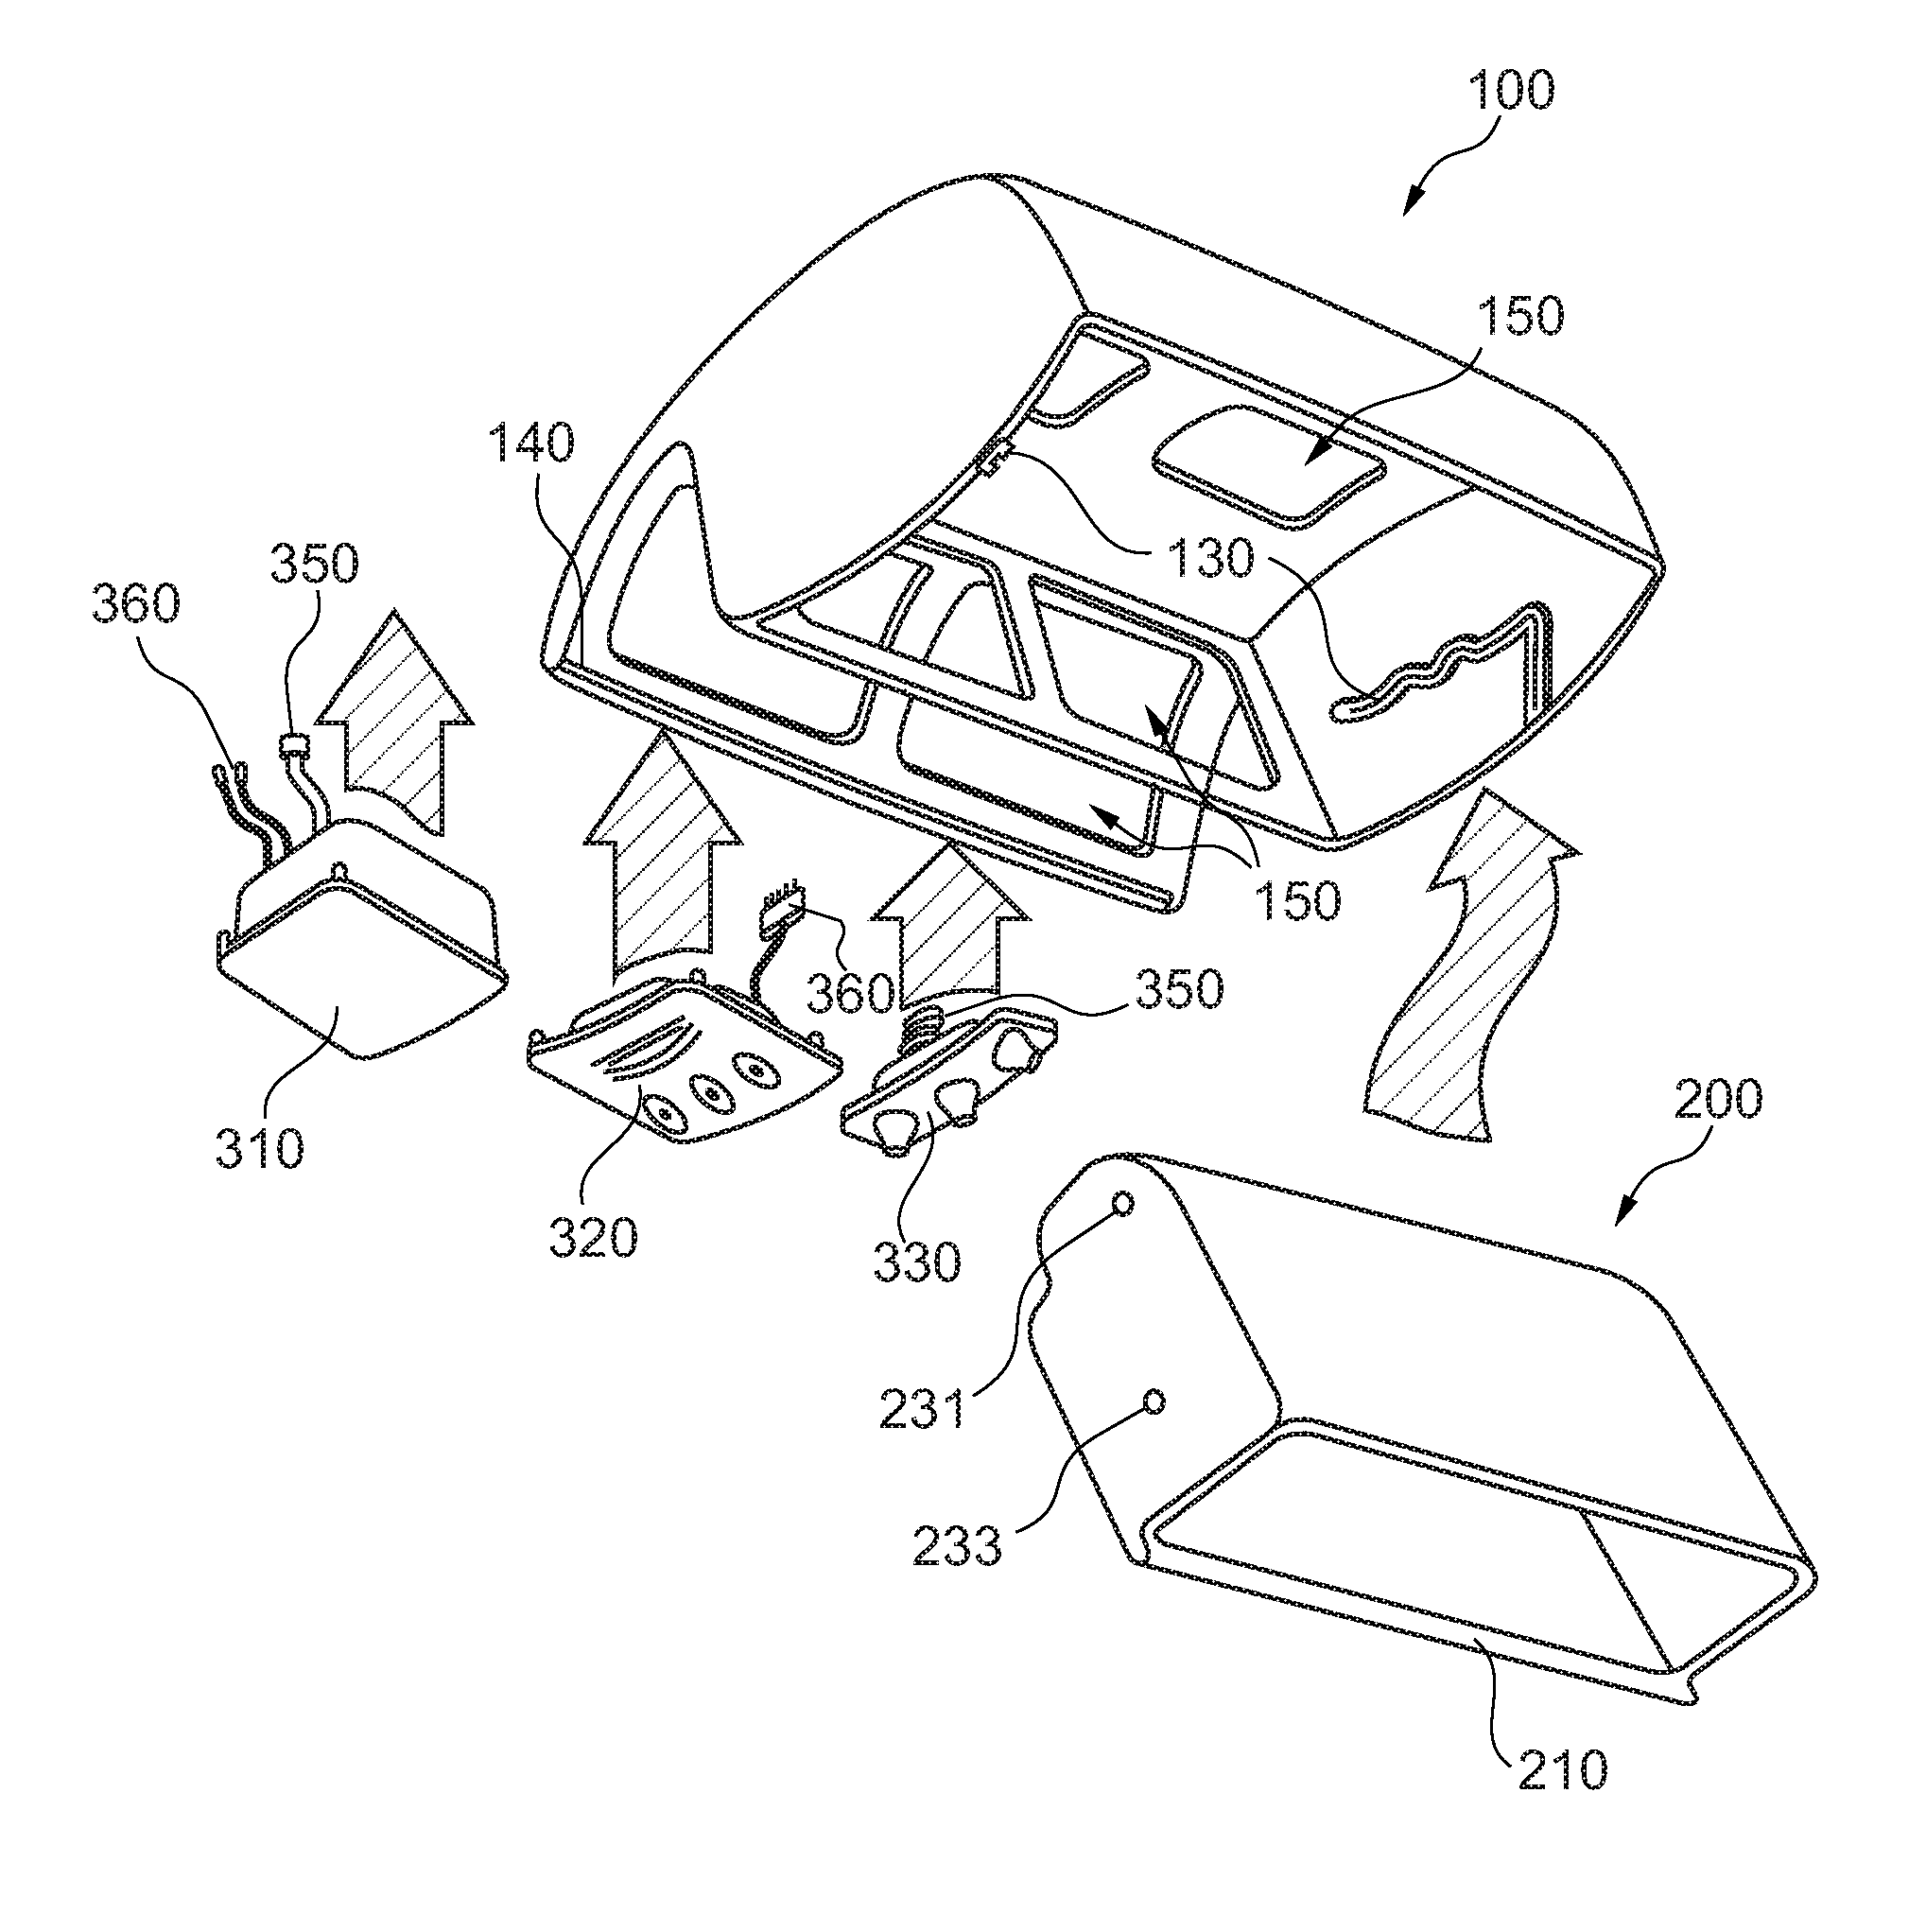 Storage compartment module with mobile storage compartment